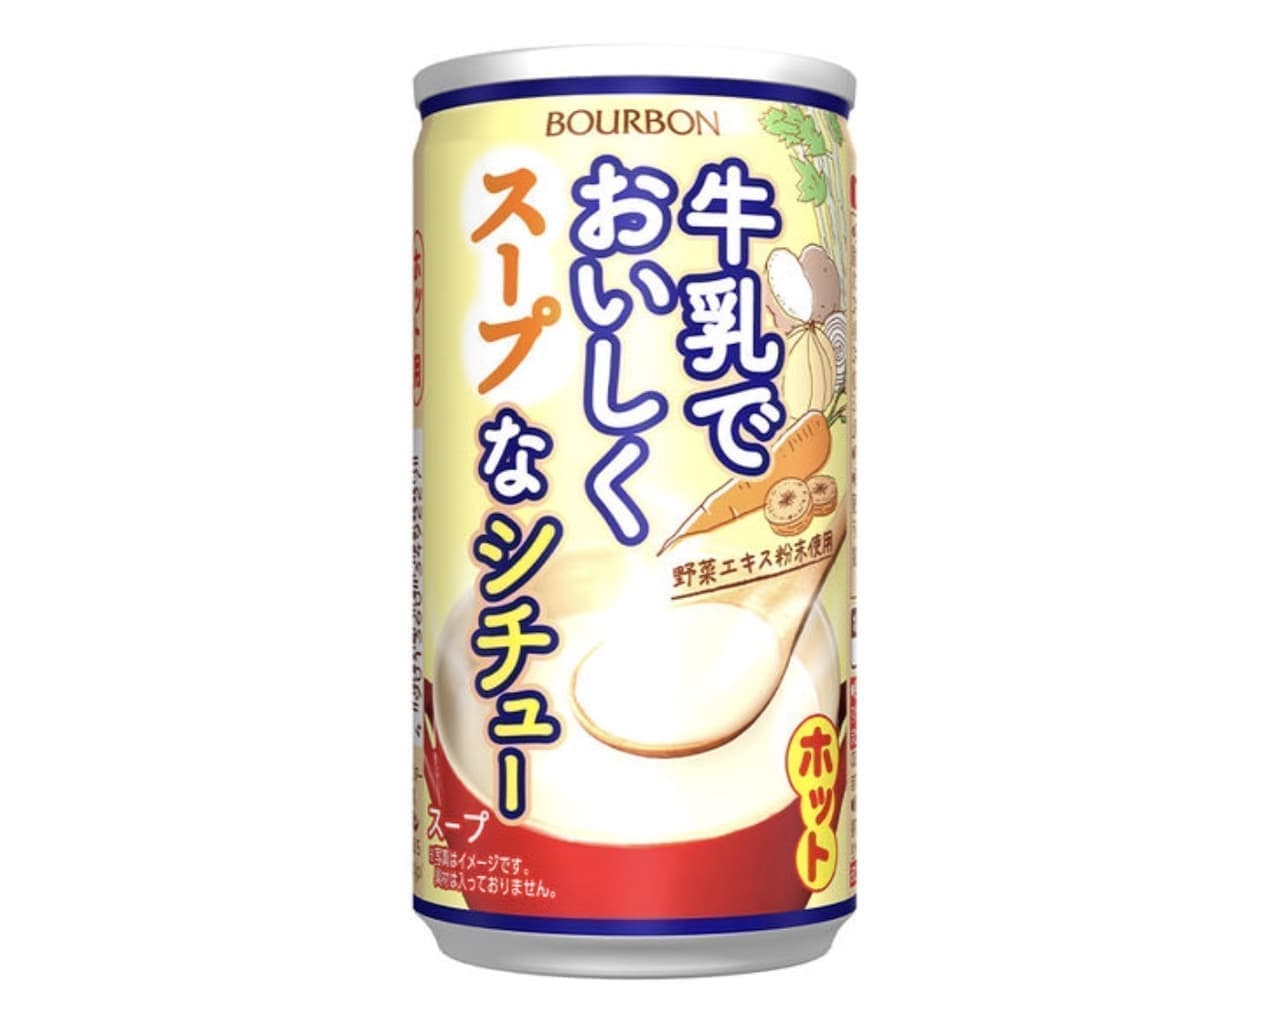 Canned Soup Stew with Milk 185: Soup stew characterized by the mildness of milk and the delicious taste of ingredients.